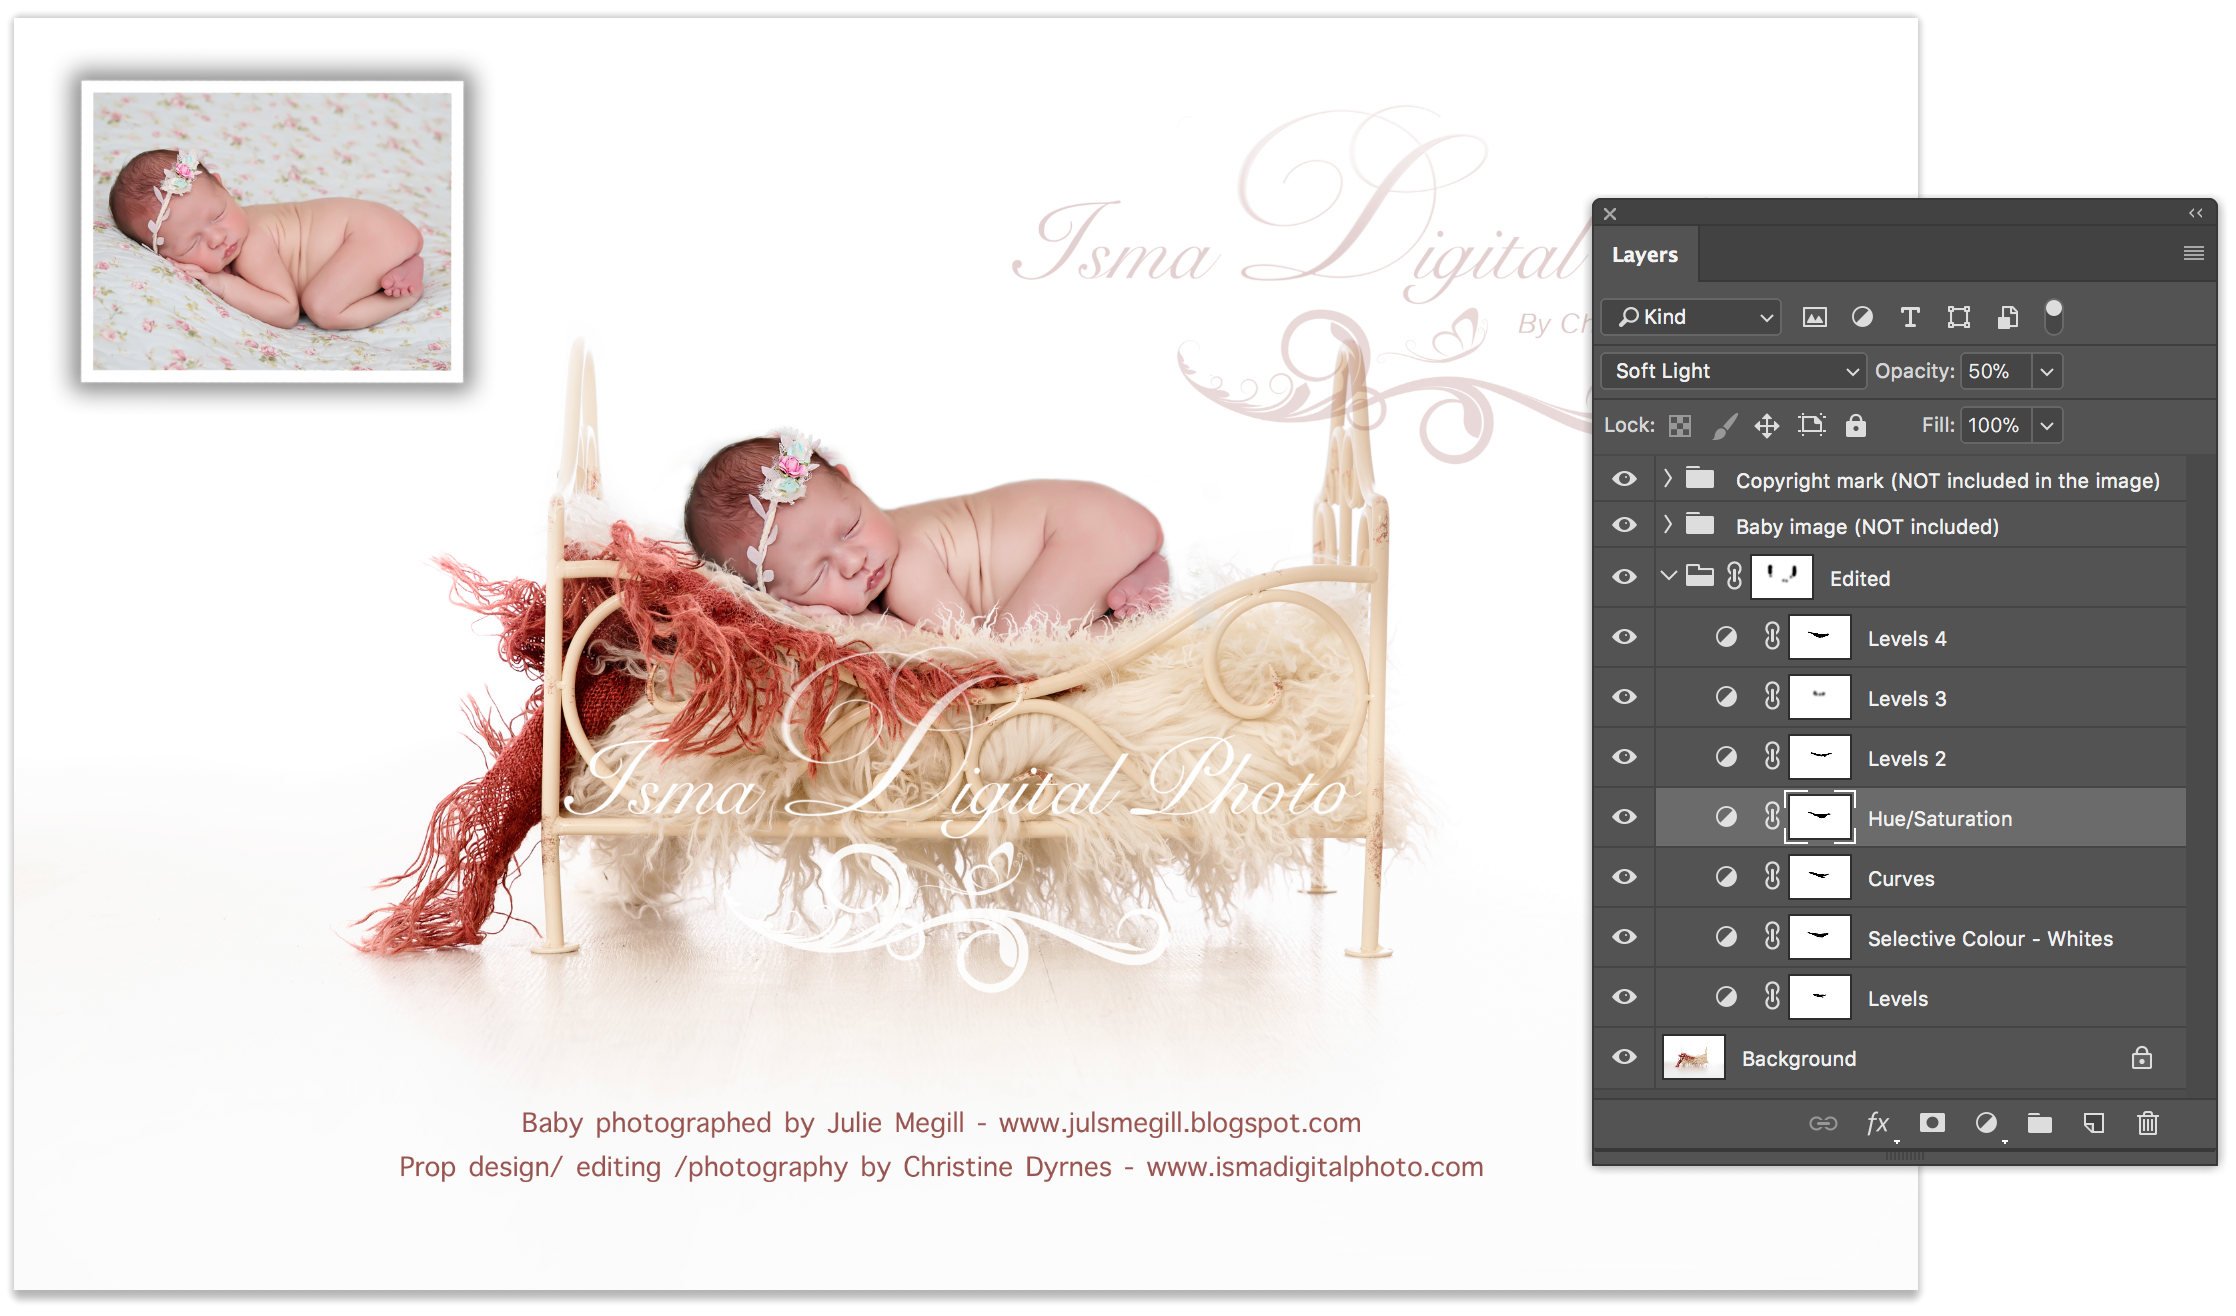 Digital Backdrop /Props for Newborn /baby photography - High resolution digital backdrop /background - one JPG and one PSD file with layers